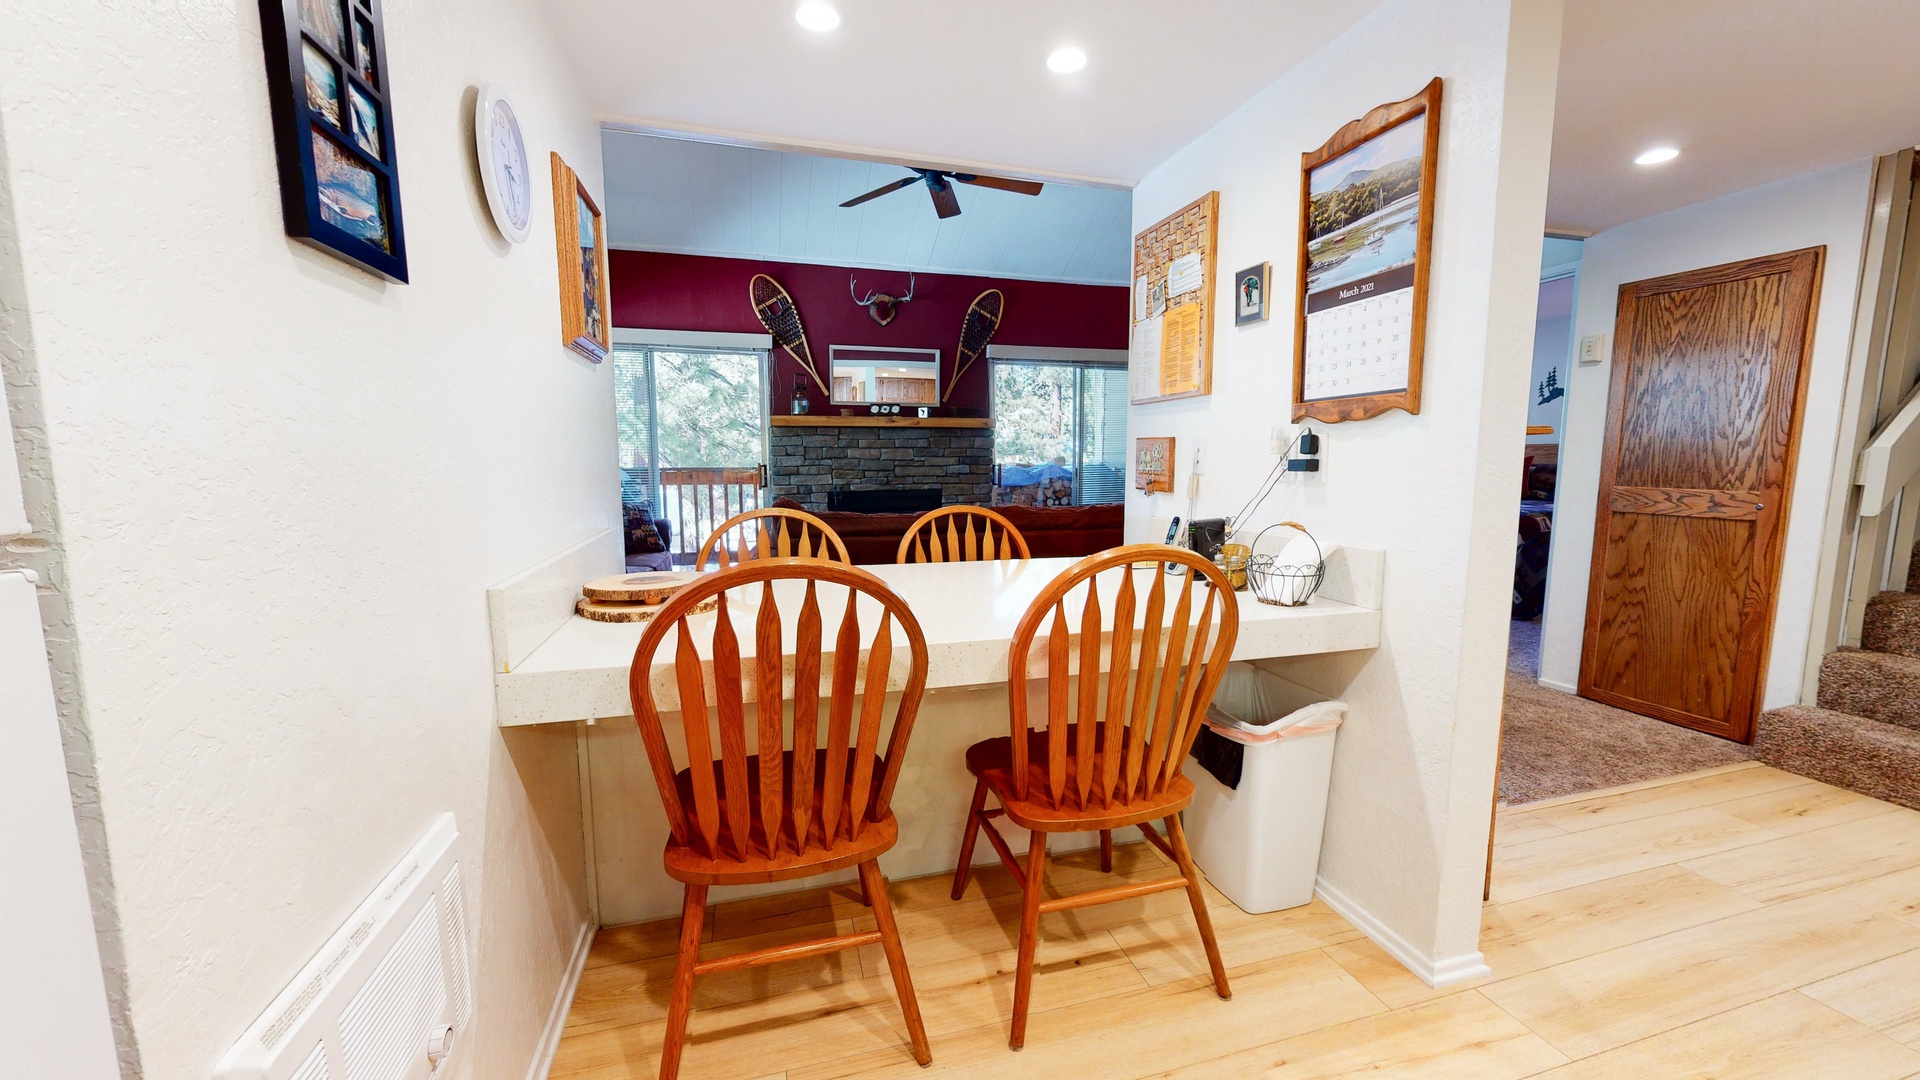 Small dining area by kitchen